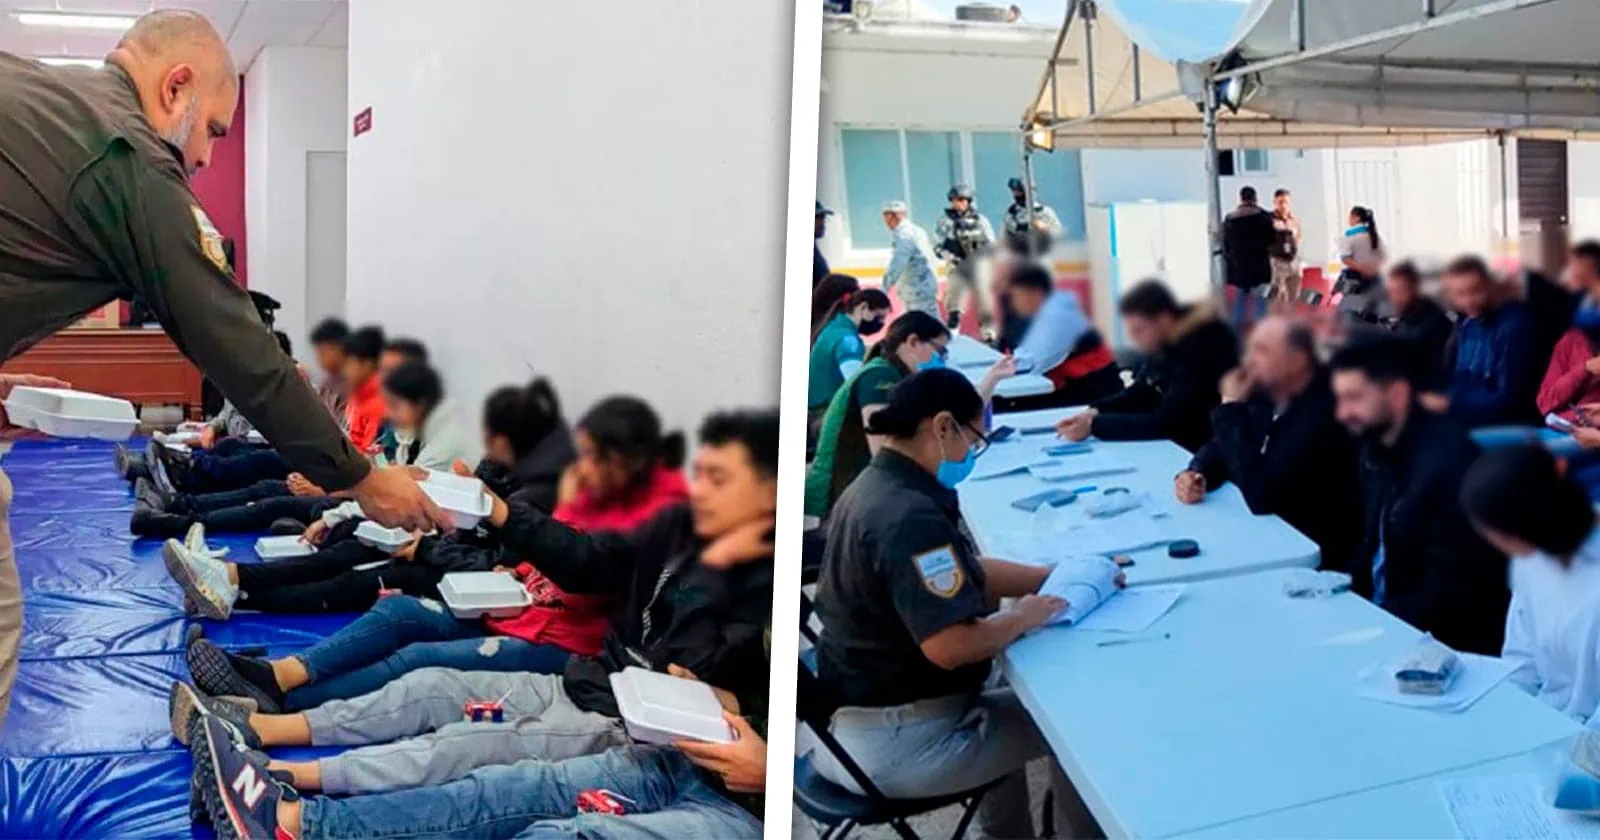 Initiate Immigration Procedure for Cubans and Other Migrants Detained by Mexican Authorities